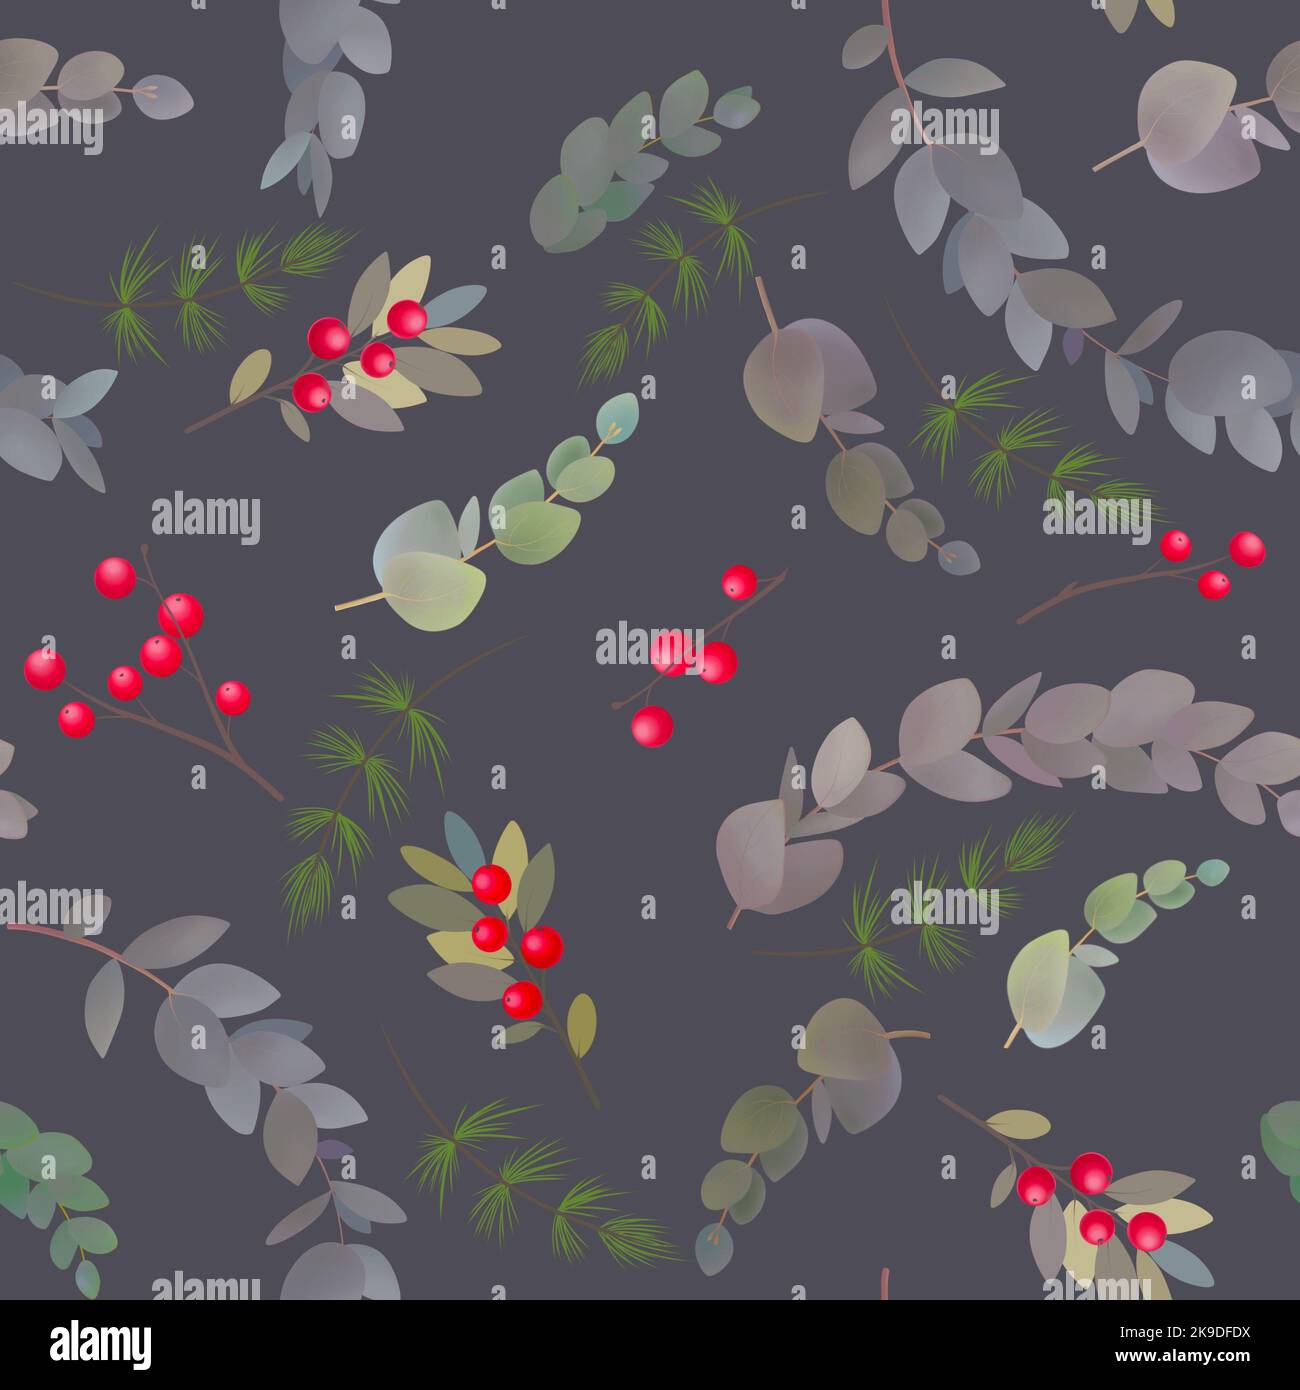 Seamless pattern with different branches of Eucalyptus, red berries.Merry Christmas illustration of greenery, foliage and natural leaves. Stock Photo